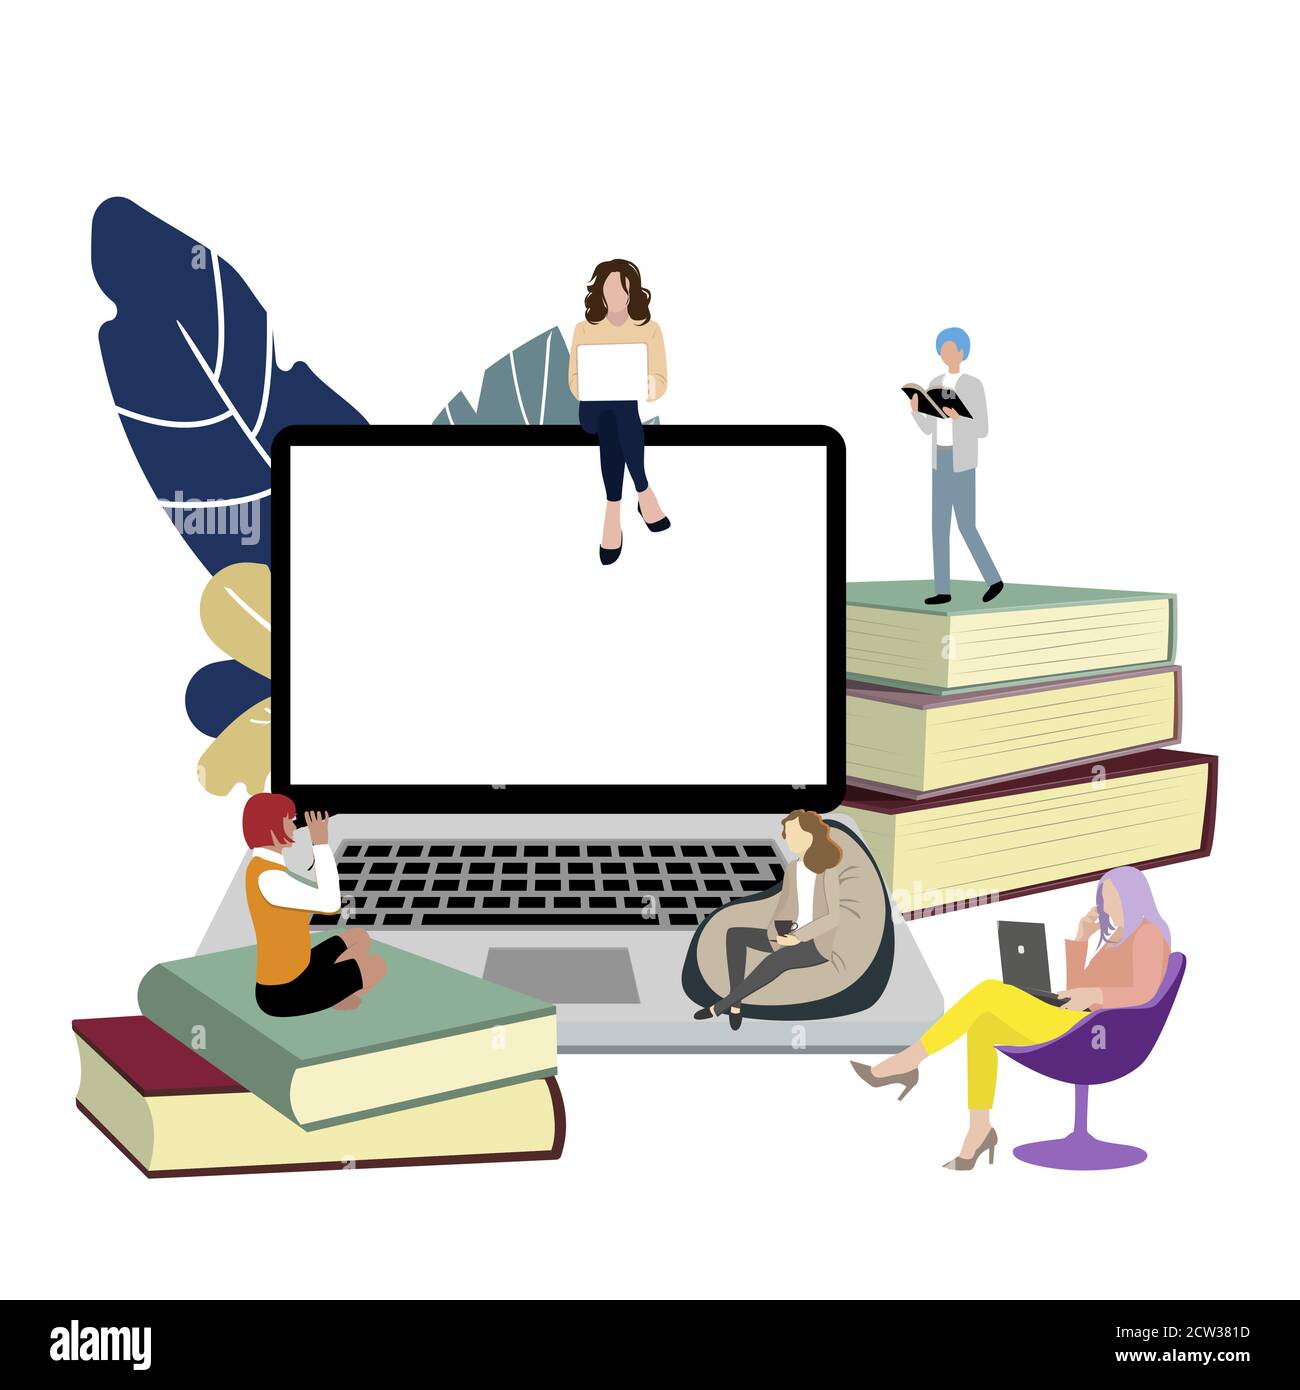 Study online concept. Vector remote education, distance training school, students studying sit on stack books and laptop, university learning illustra Stock Vector